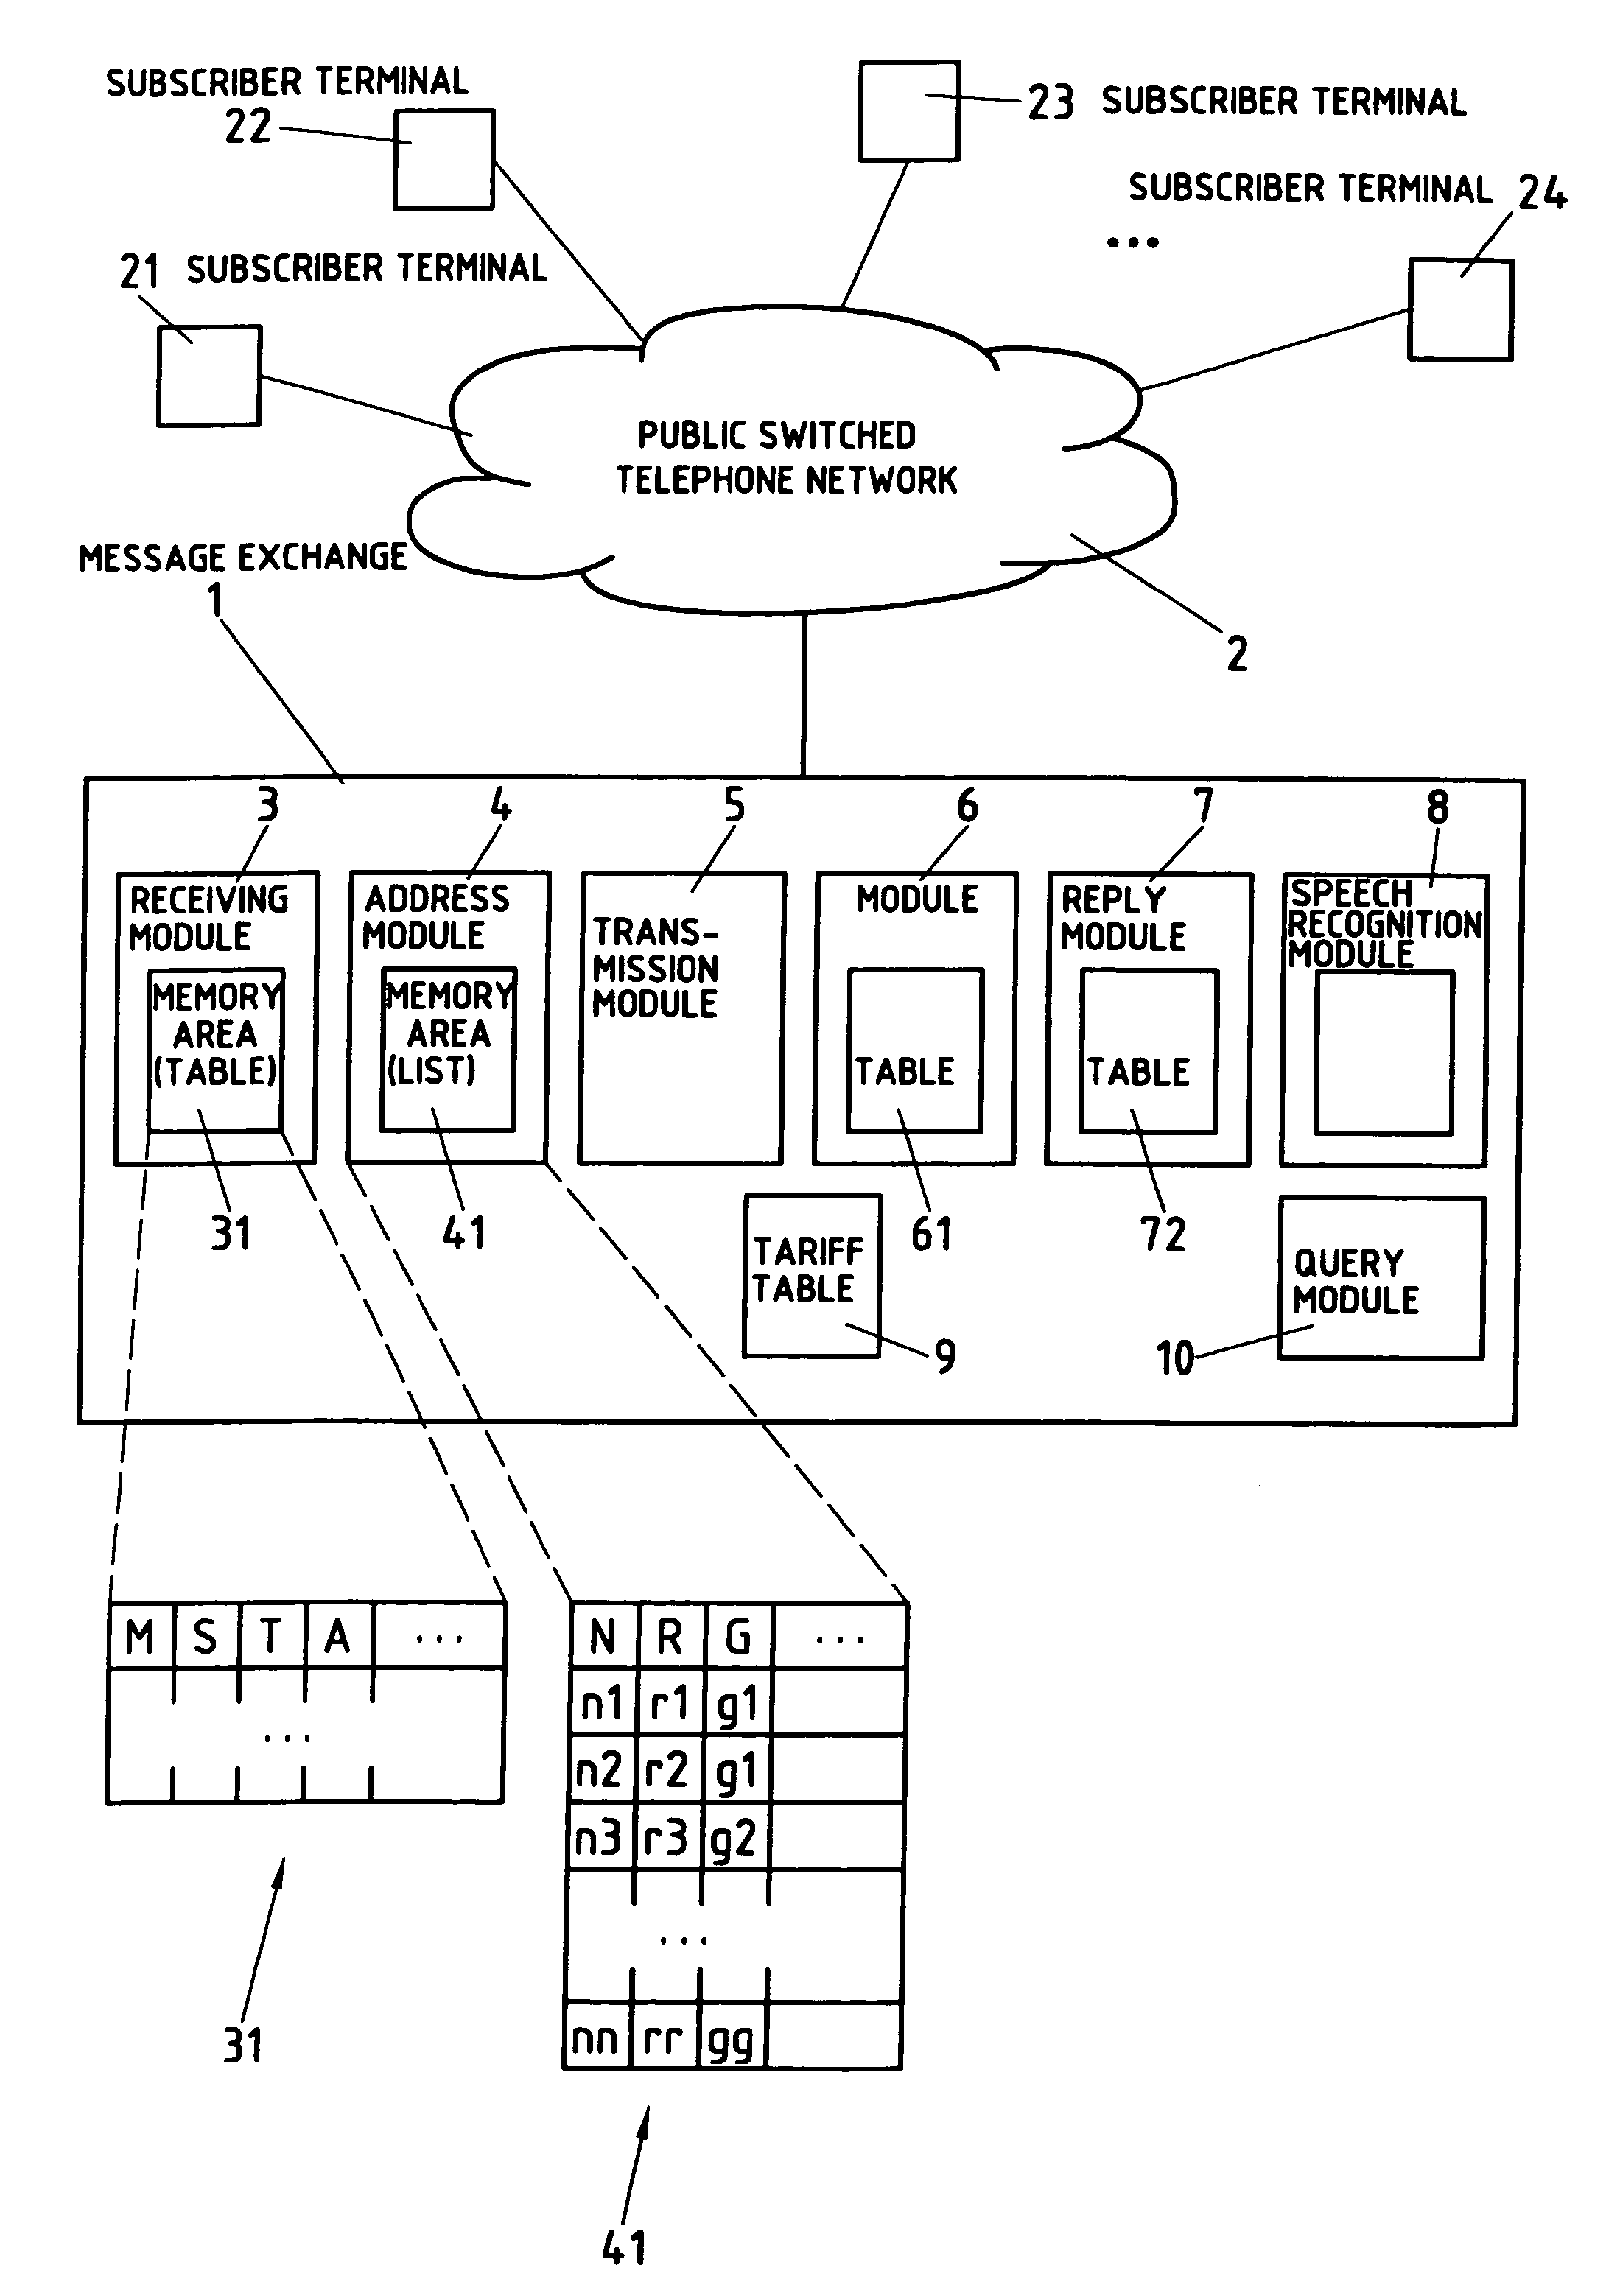 Message exchange and method for distributing messages in telephone networks